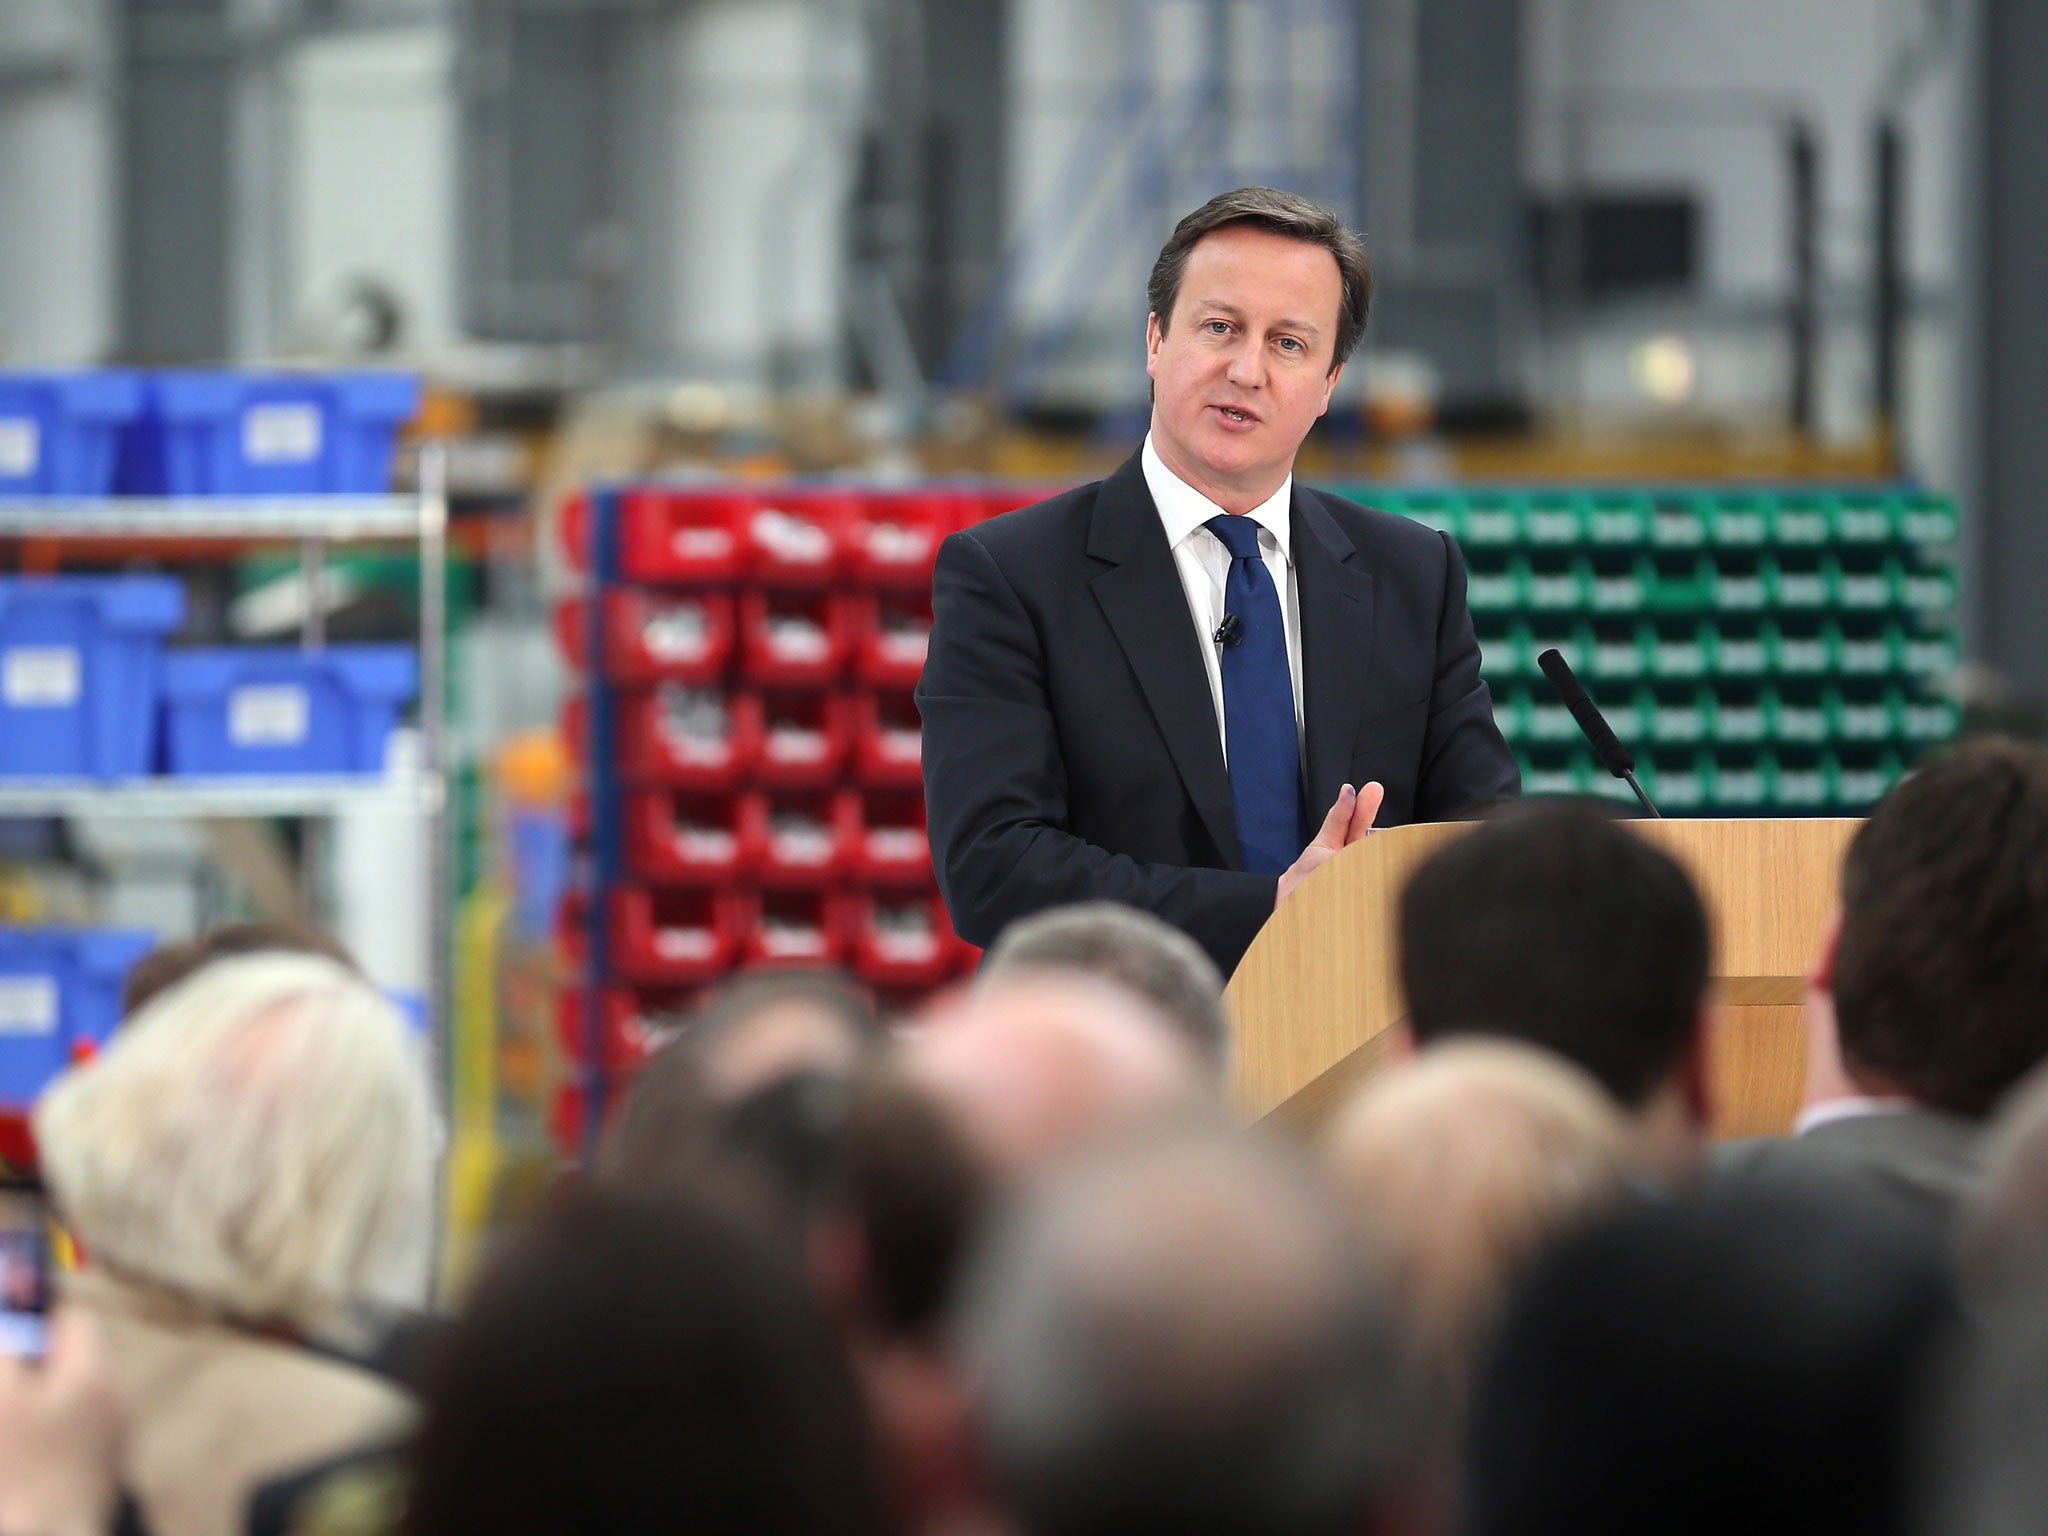 British Prime Minister David Cameron delivers his speech on the economy during a visit to precision grinding engineers Cinetic Landis Ltd on March 7, 2013 in Keighley, England.